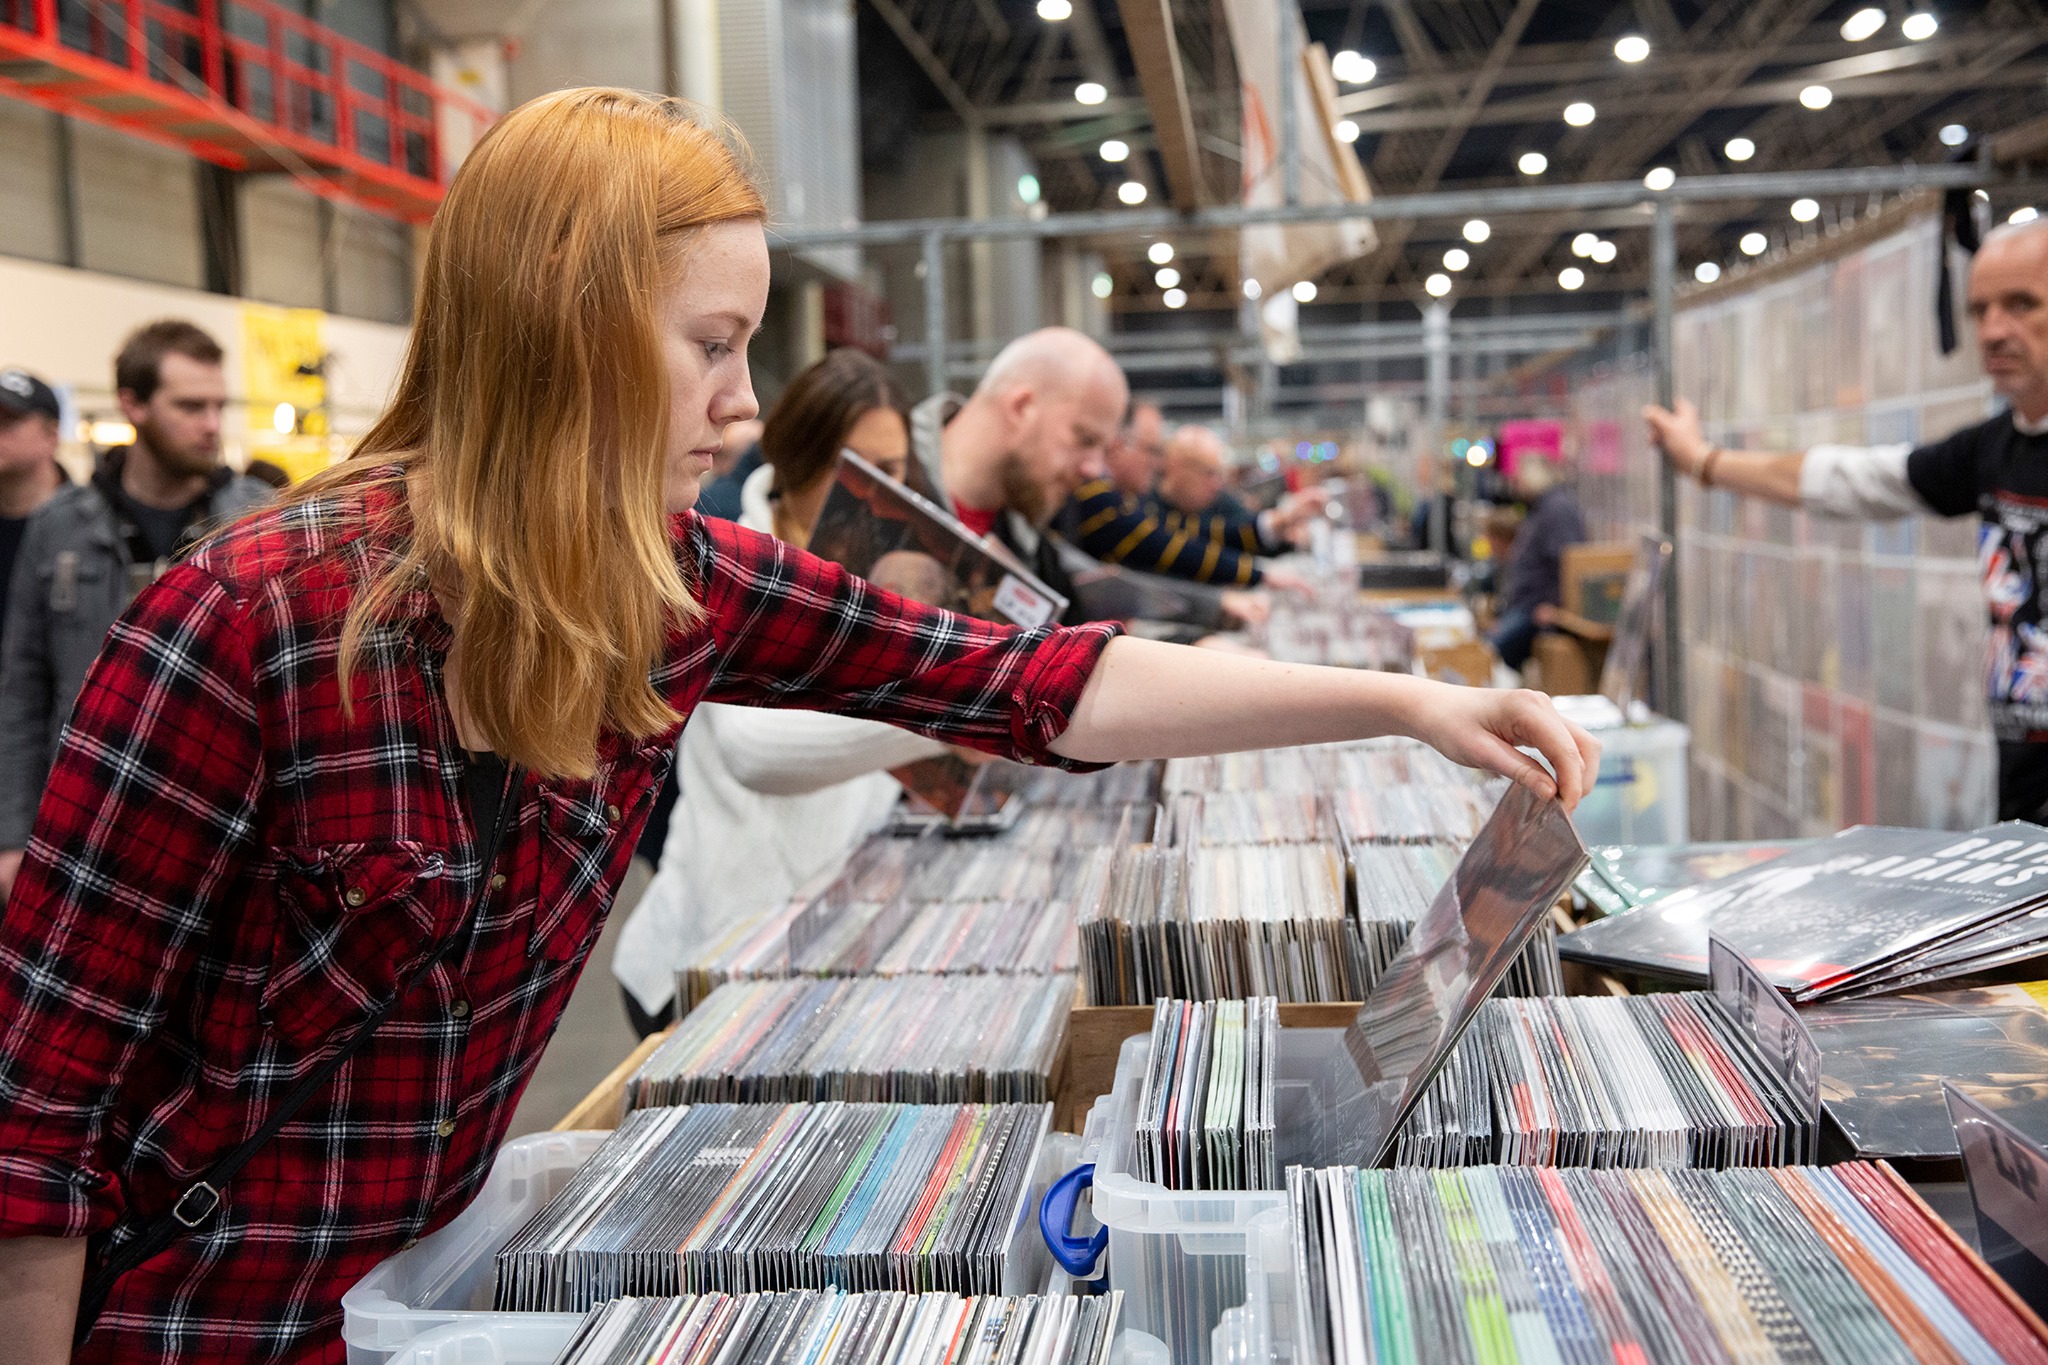 LGW21 to coincide with Mega Record & CD Fair, Europe's biggest record fair, 13 & 14 November in Utrecht